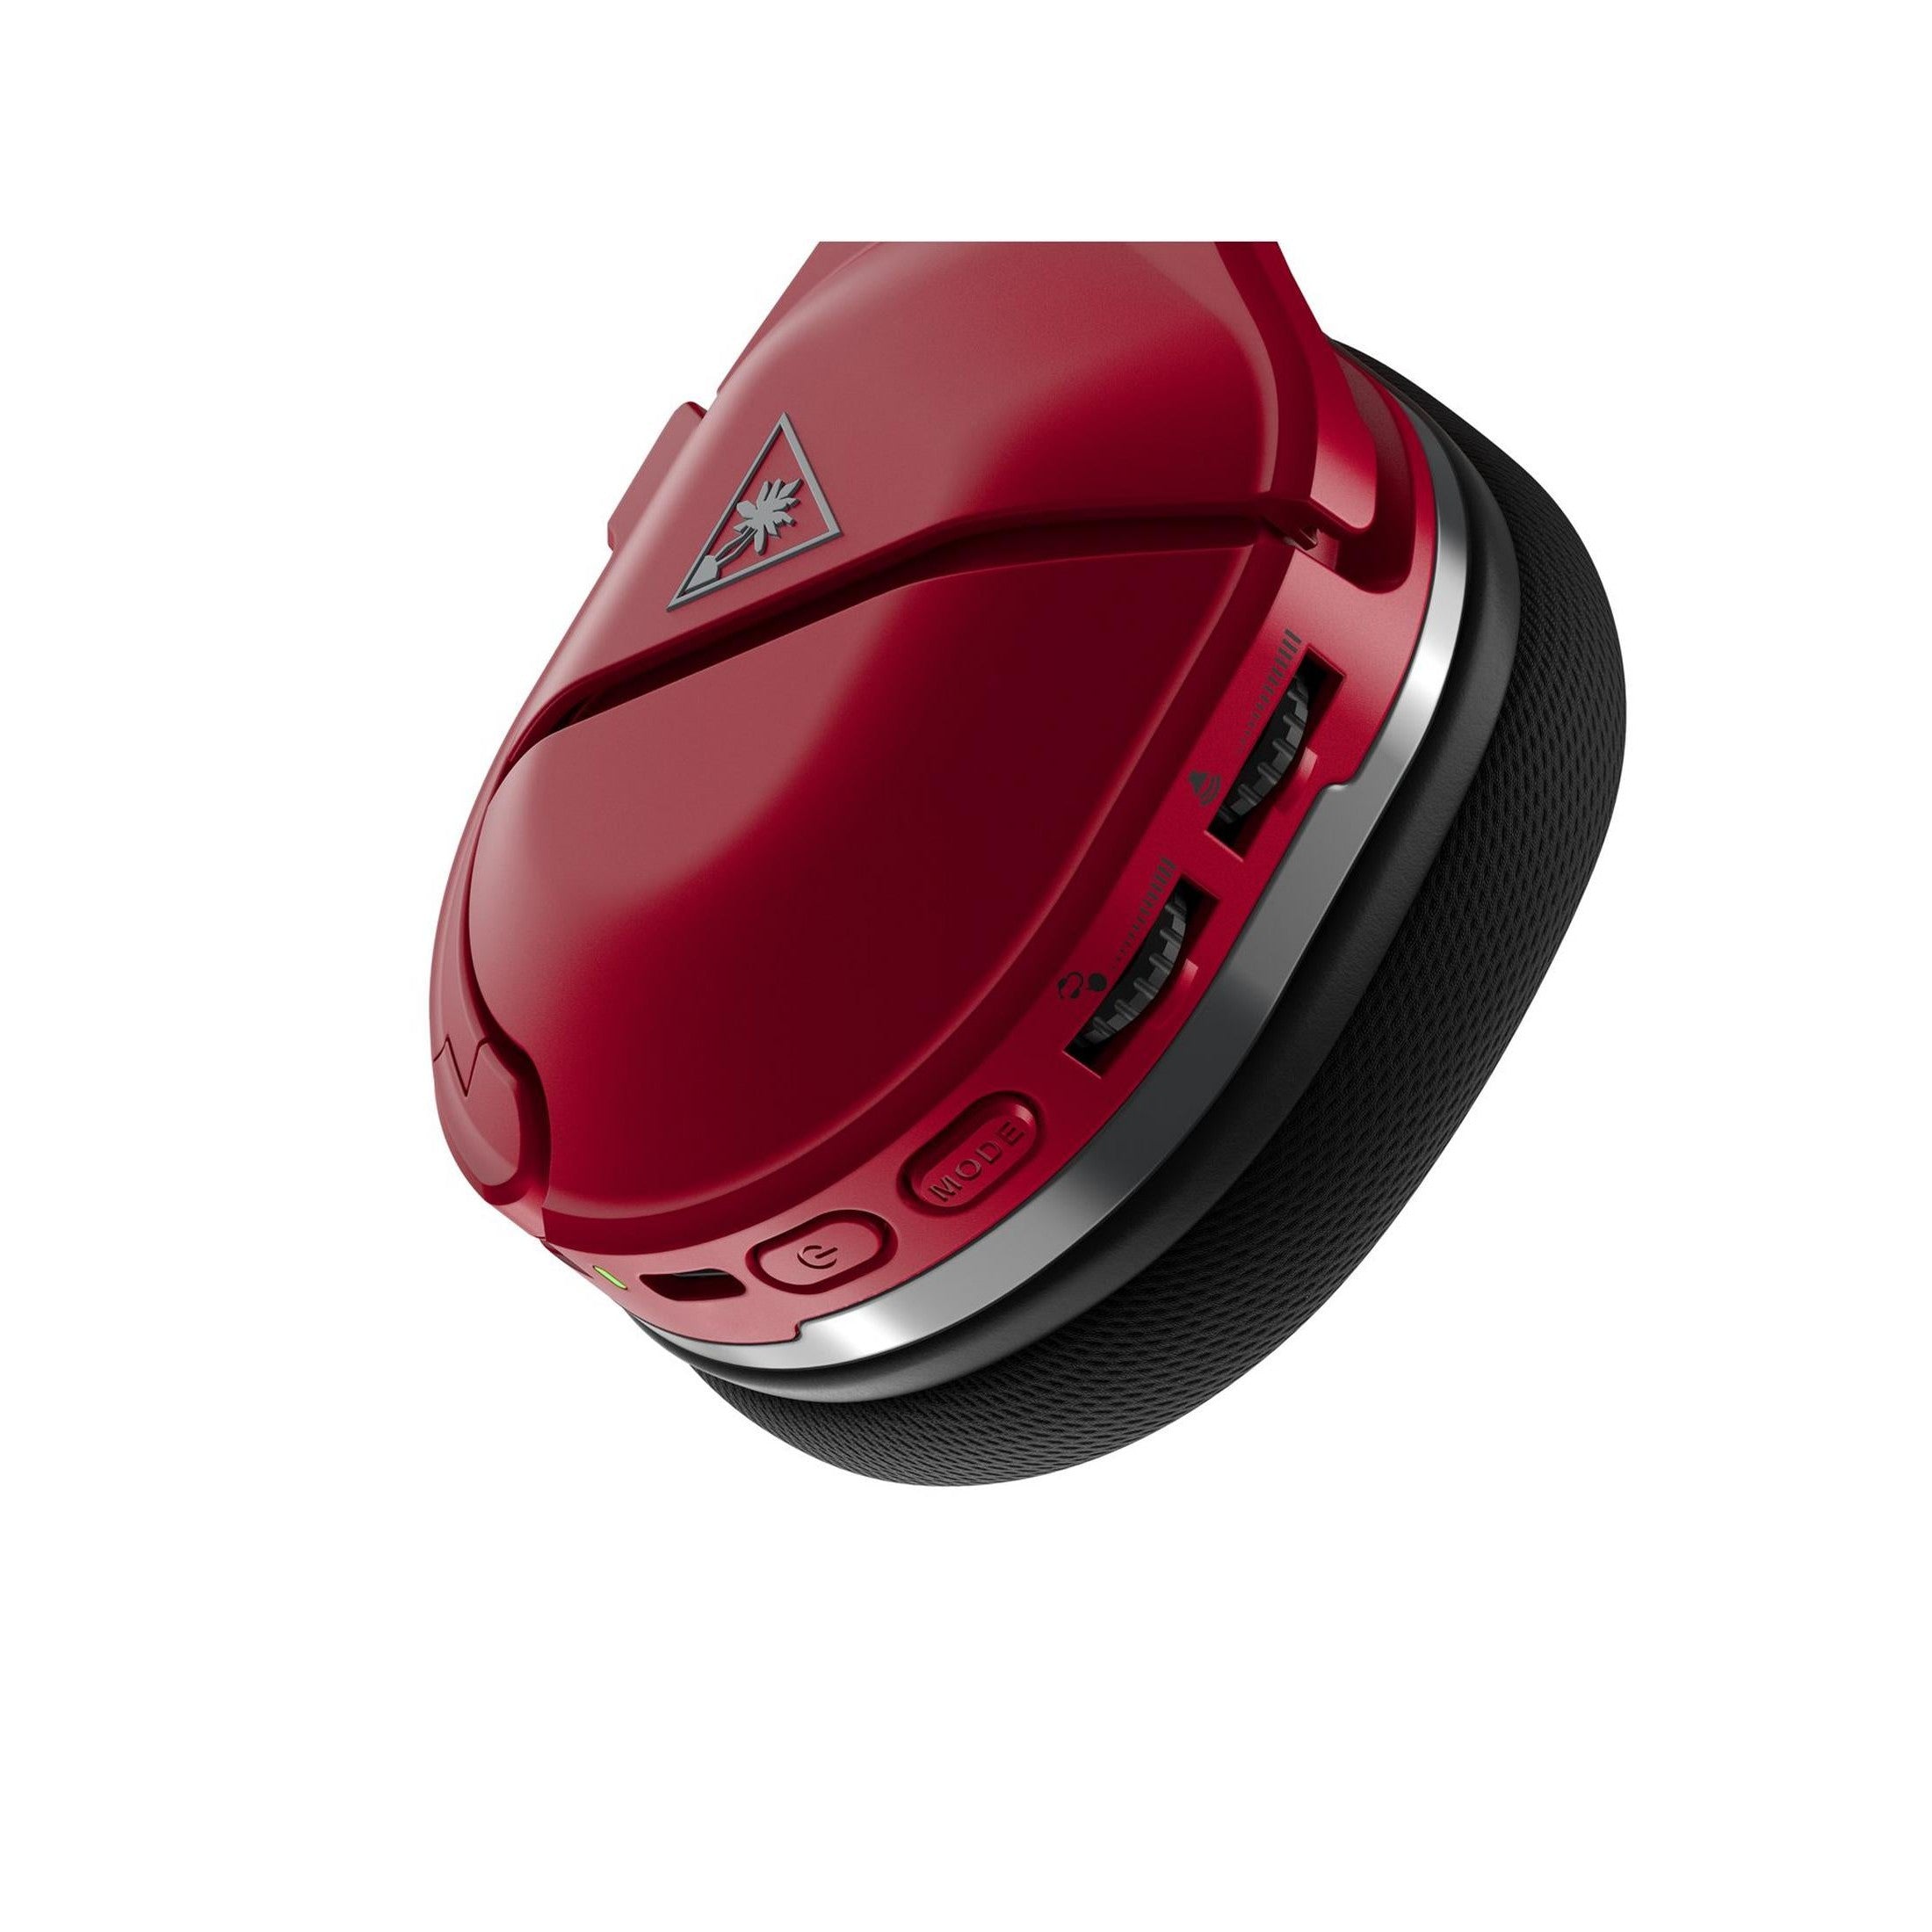 Turtle Beach Stealth 600x MAX Wireless for Xbox - Red - Refurbished Excellent